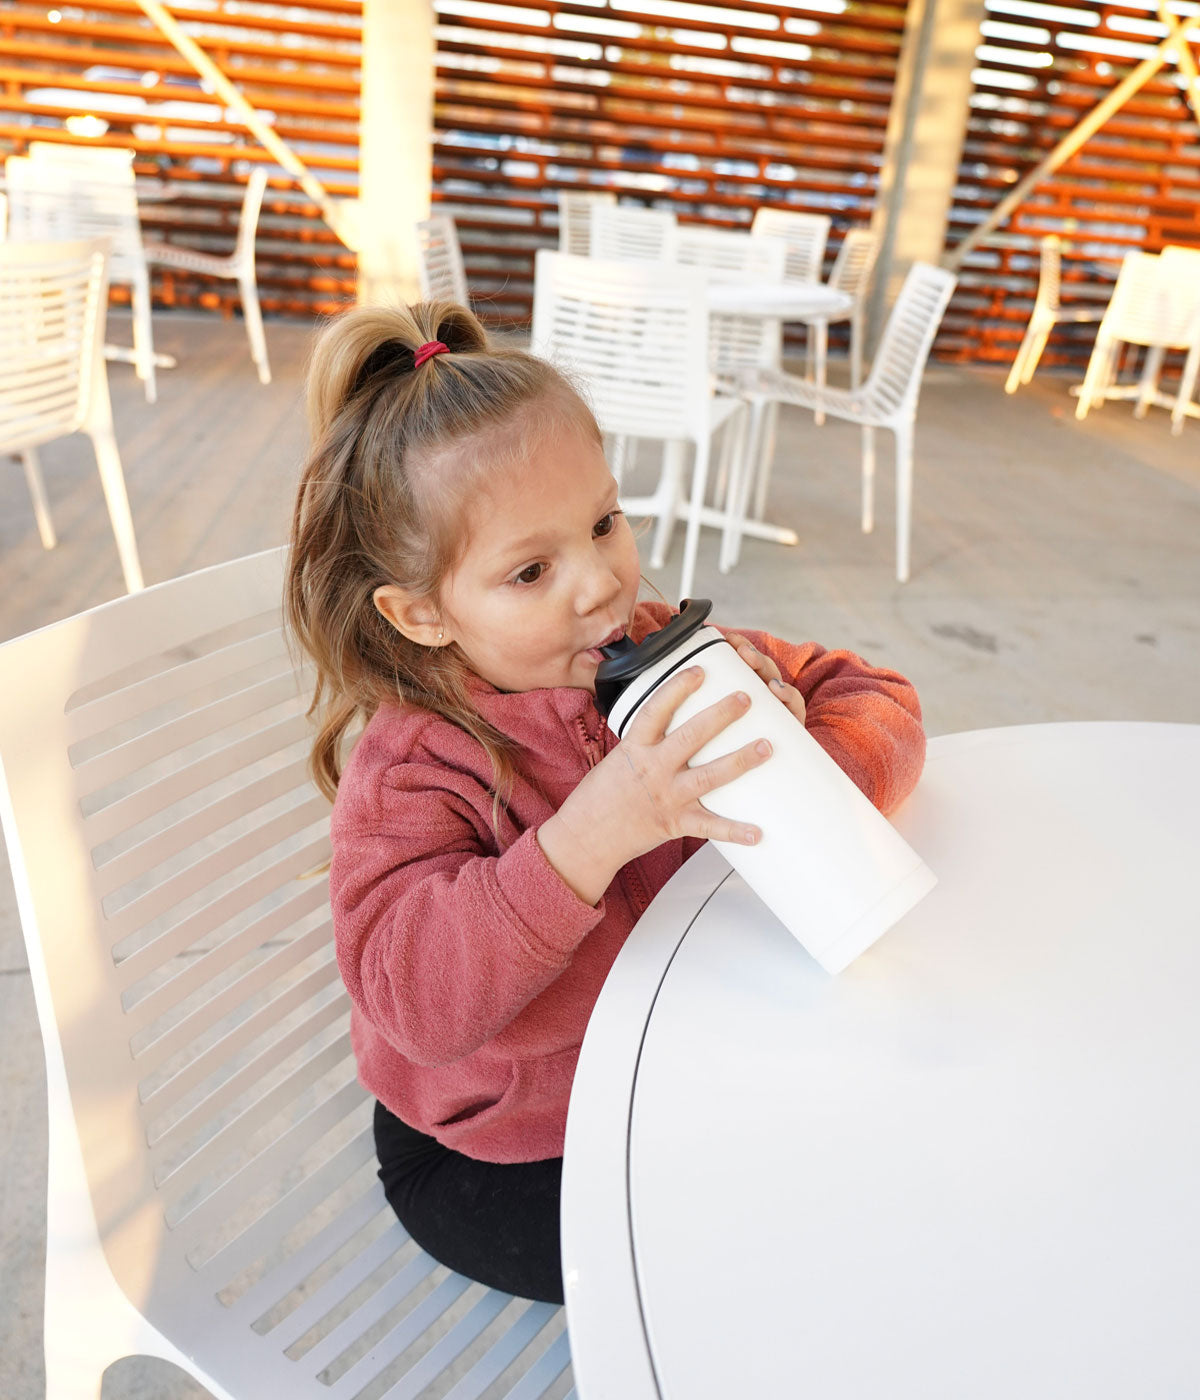 This image shows a little girl sitting at a table taking a drink from a White 14oz Sport Bottle